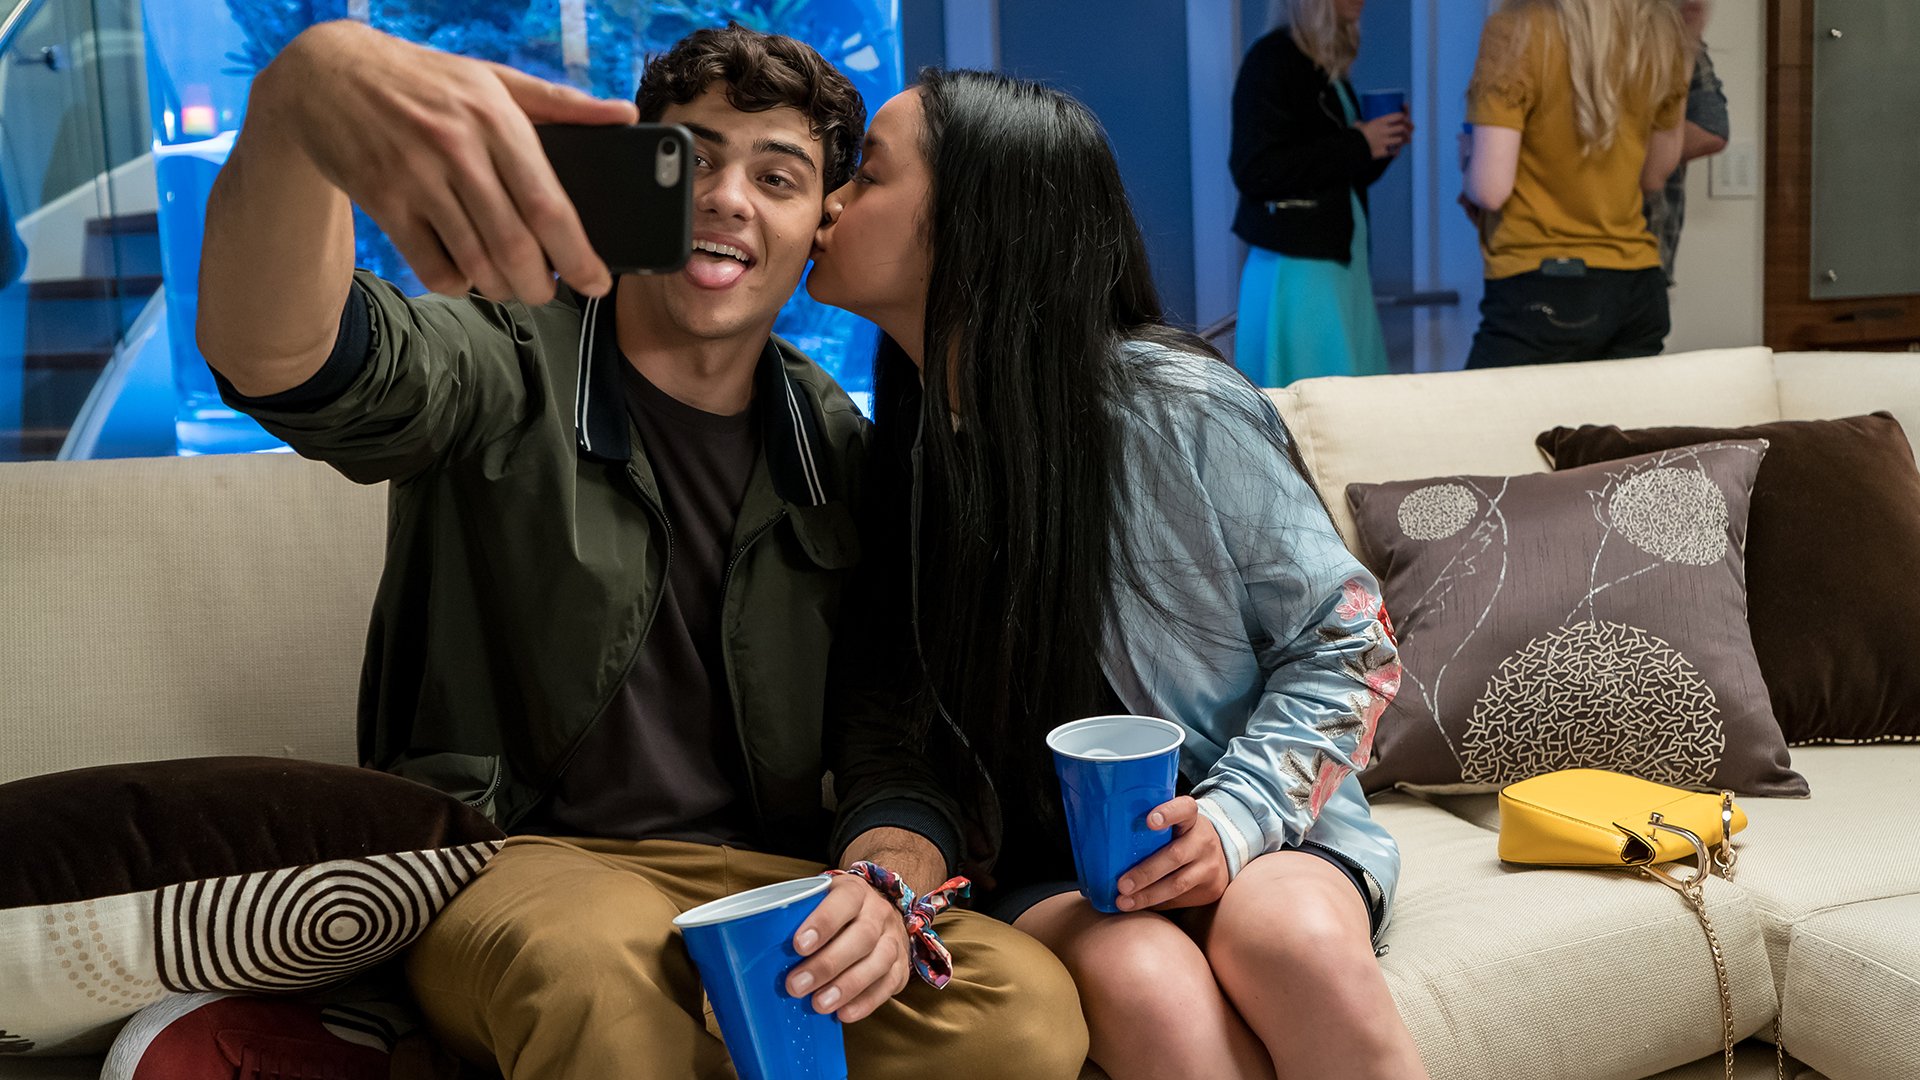 When Is 'To All the Boys I've Loved Before' Sequel?